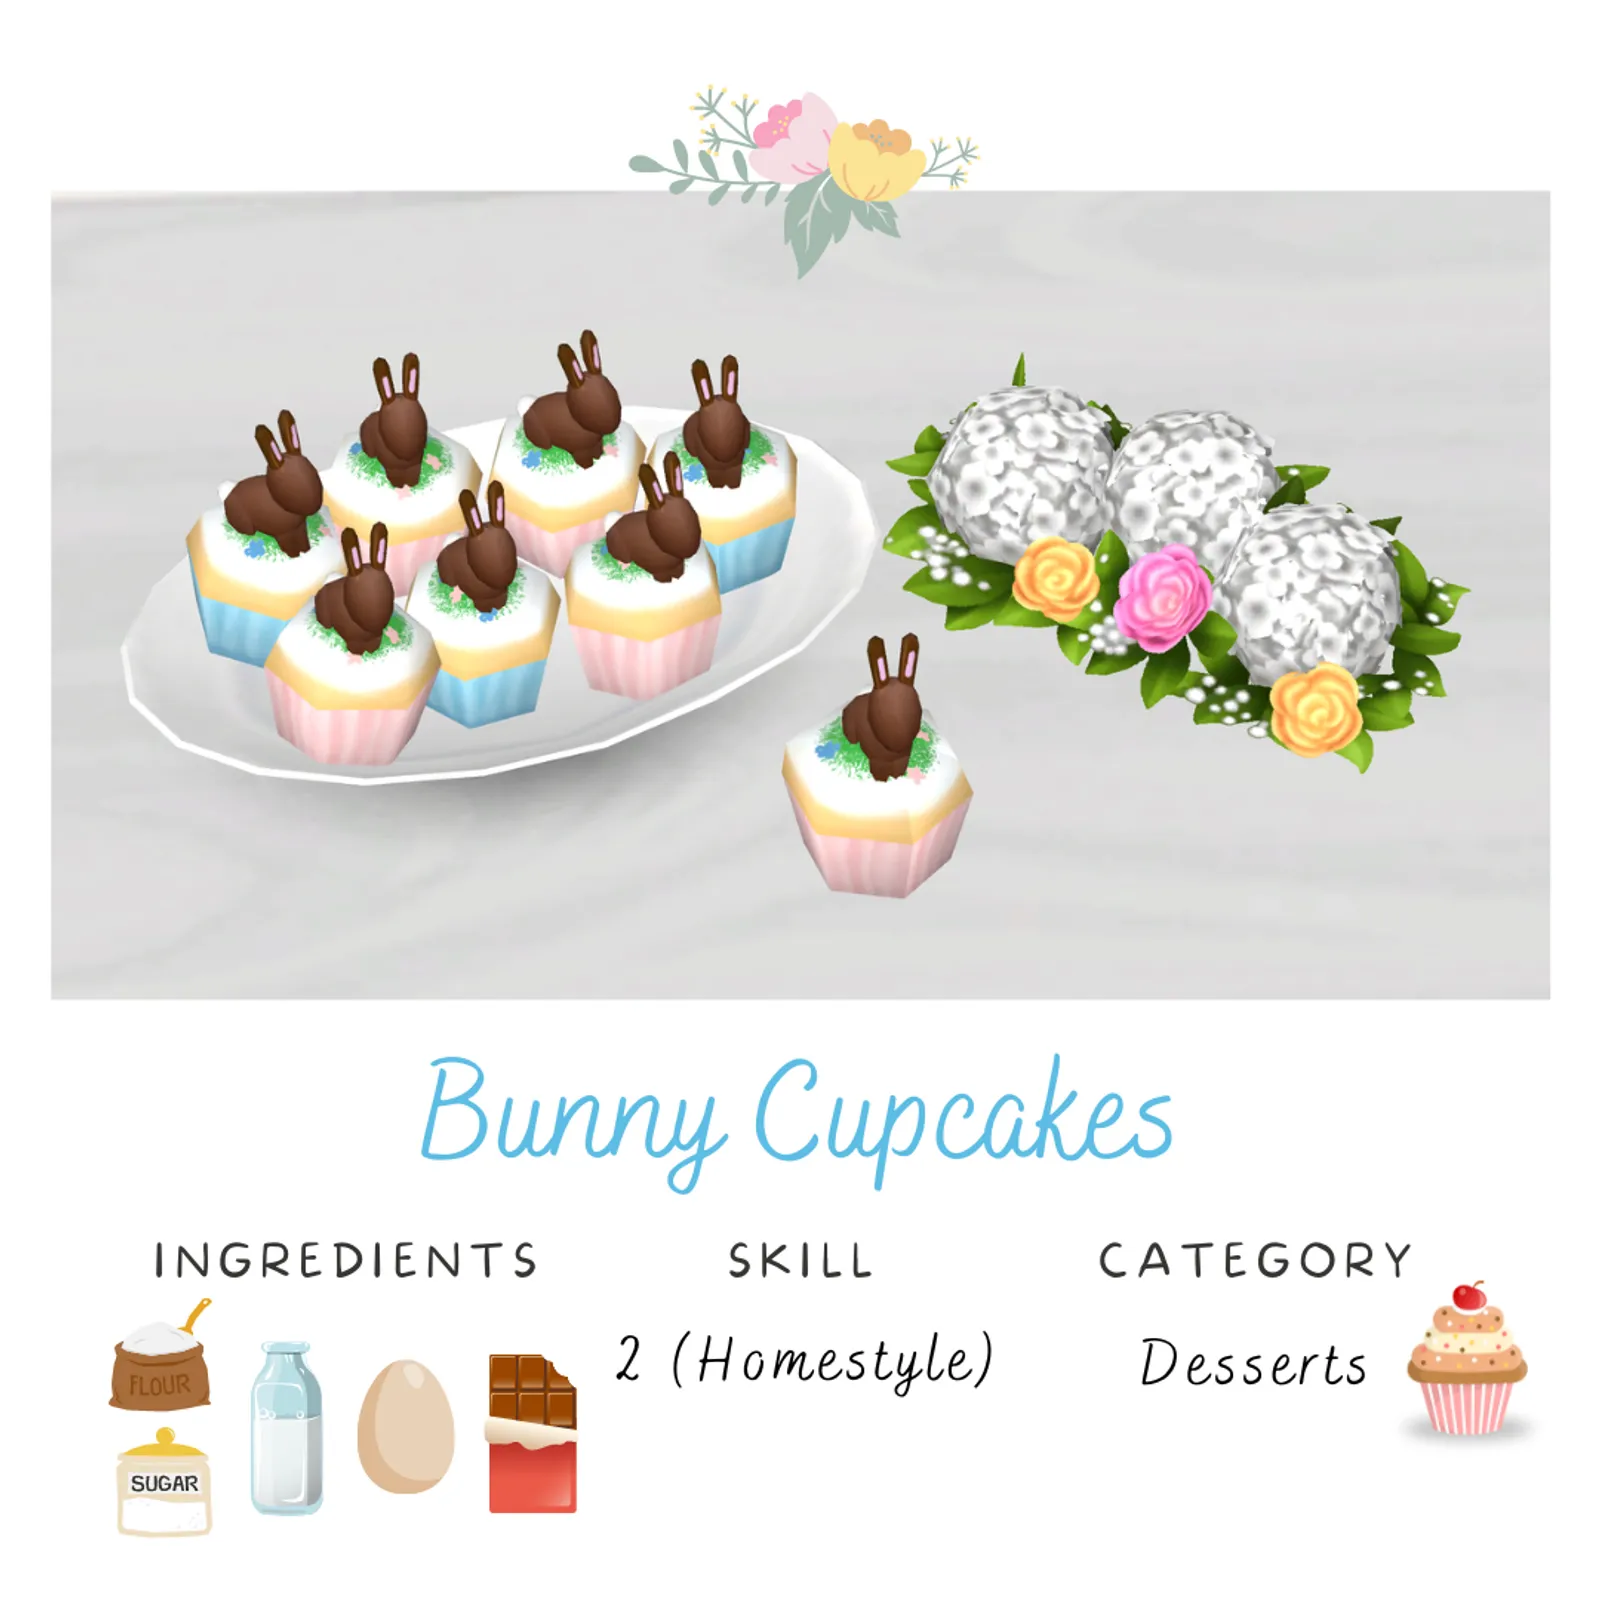 Bunny Cupcakes - Easter/Spring Treat #1!